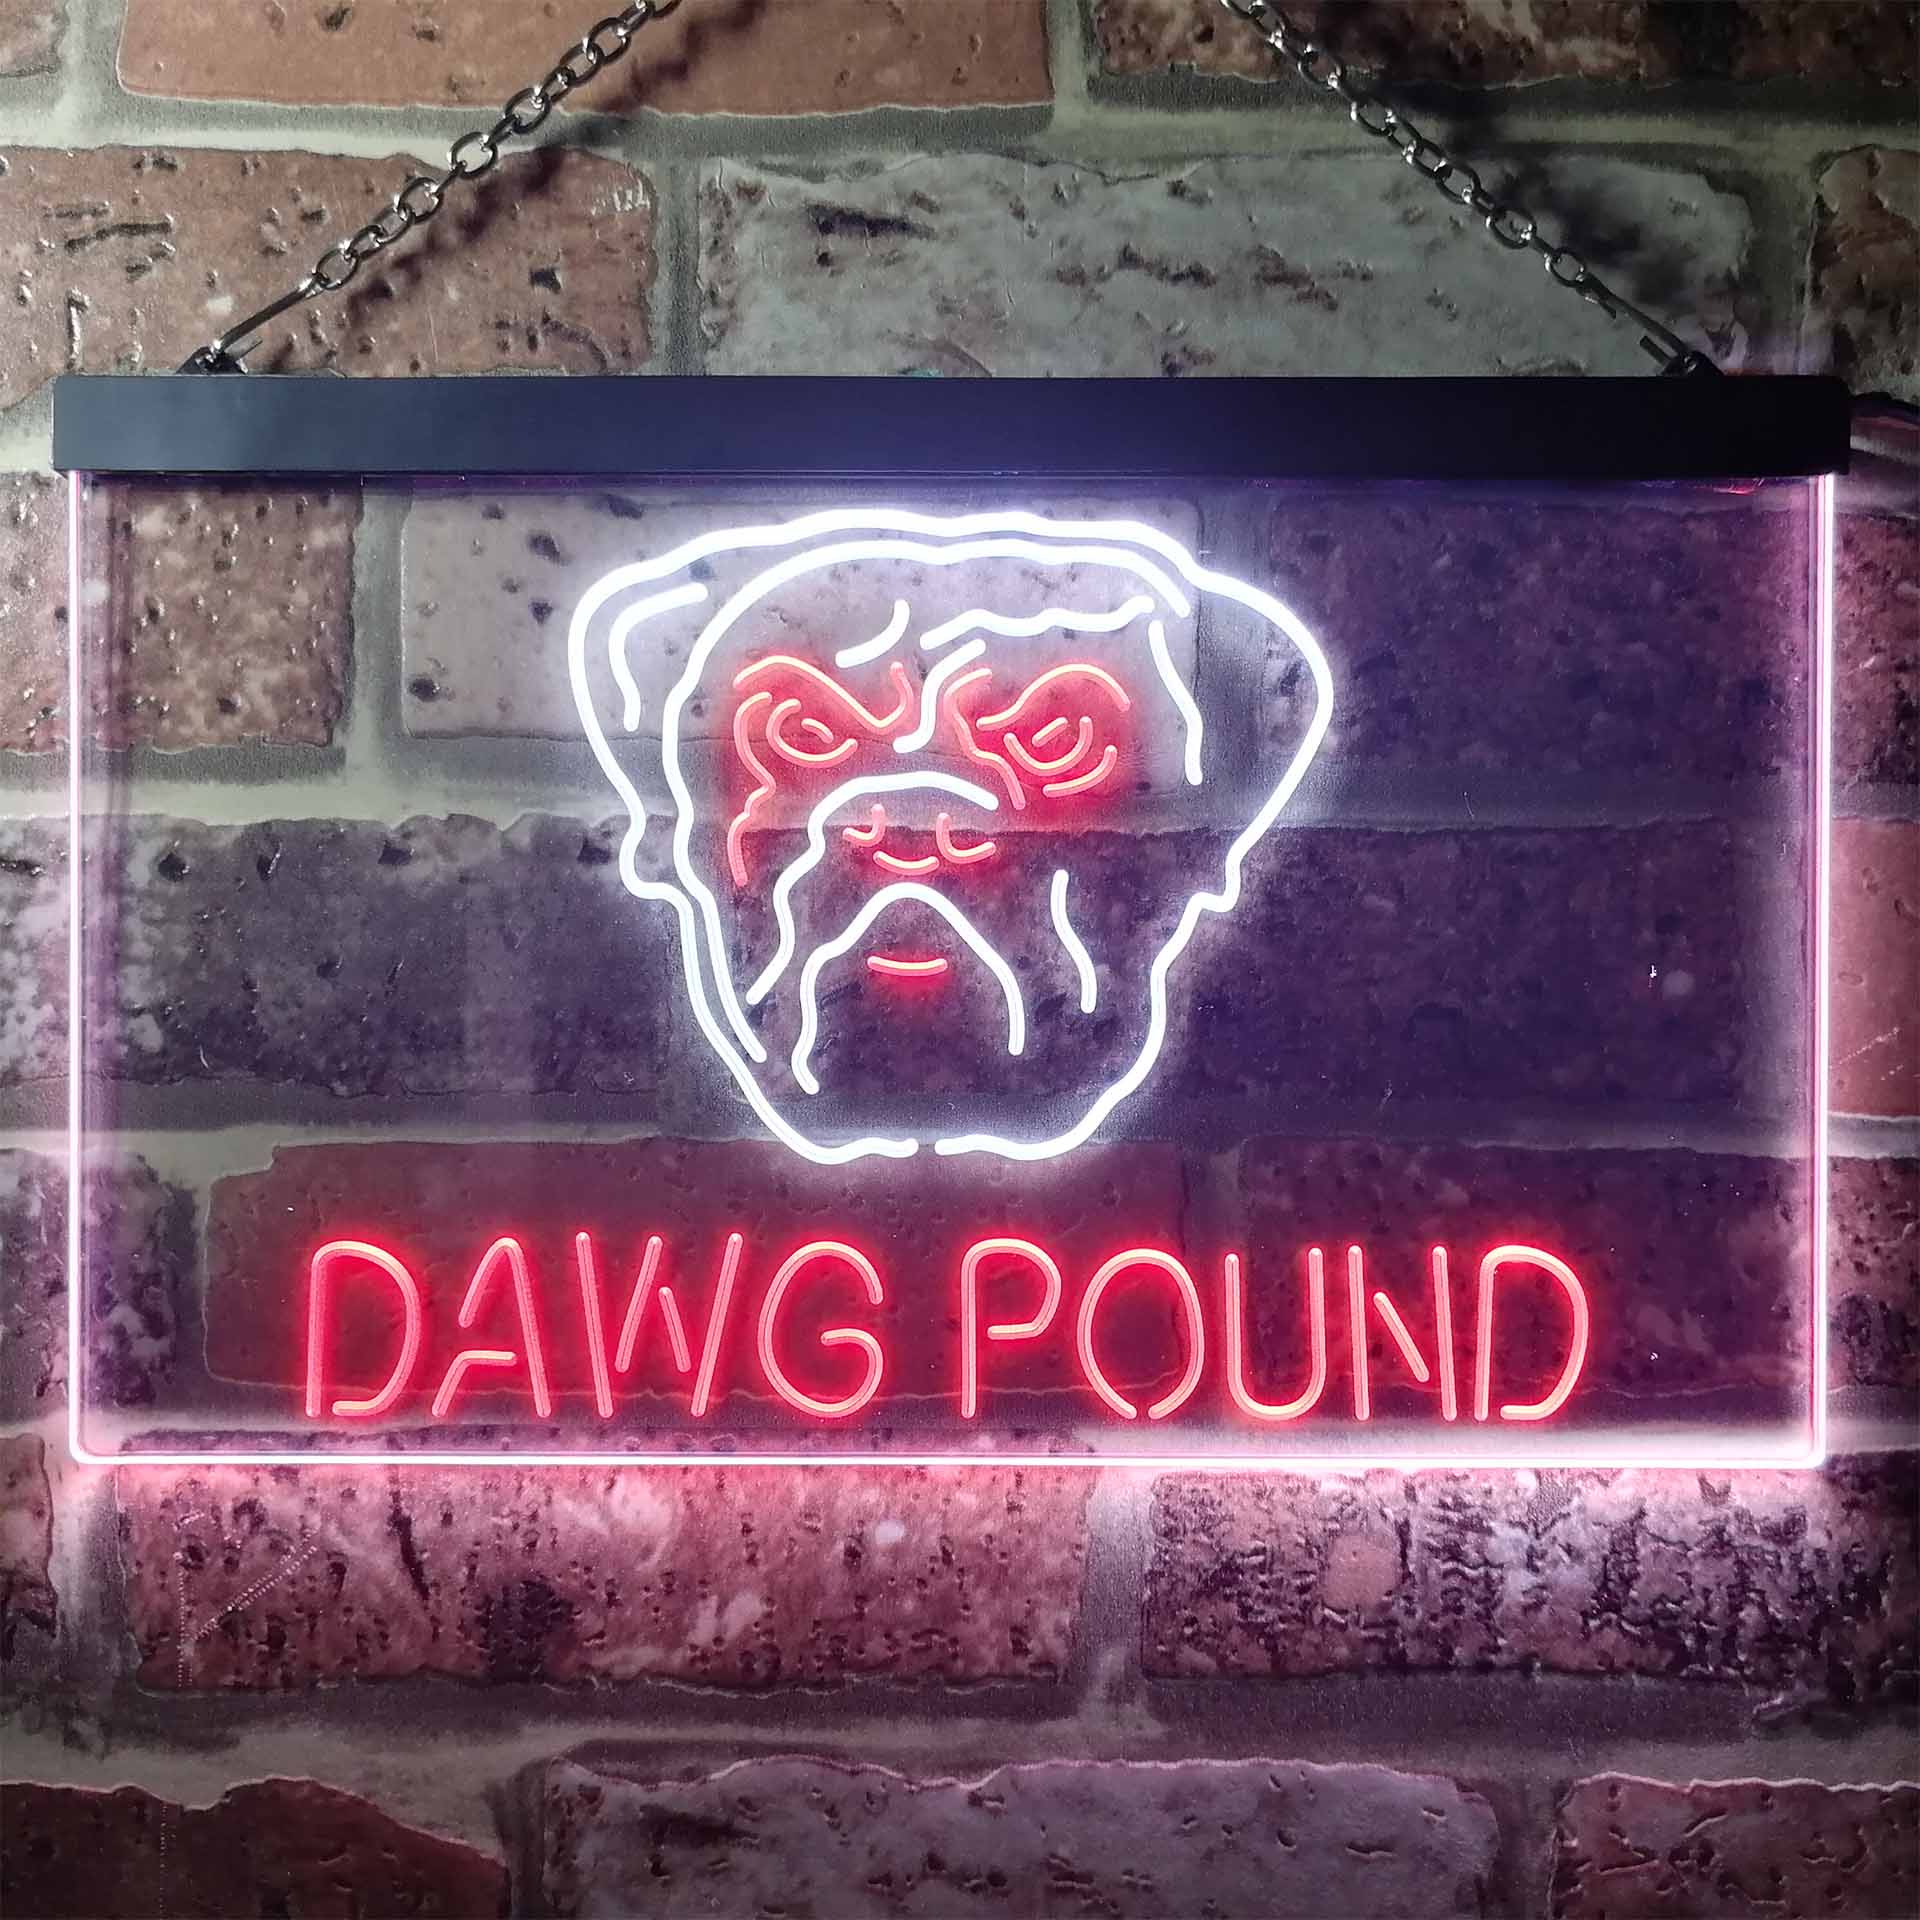 Dawg Pound Cleveland Browns Neon Light LED Sign